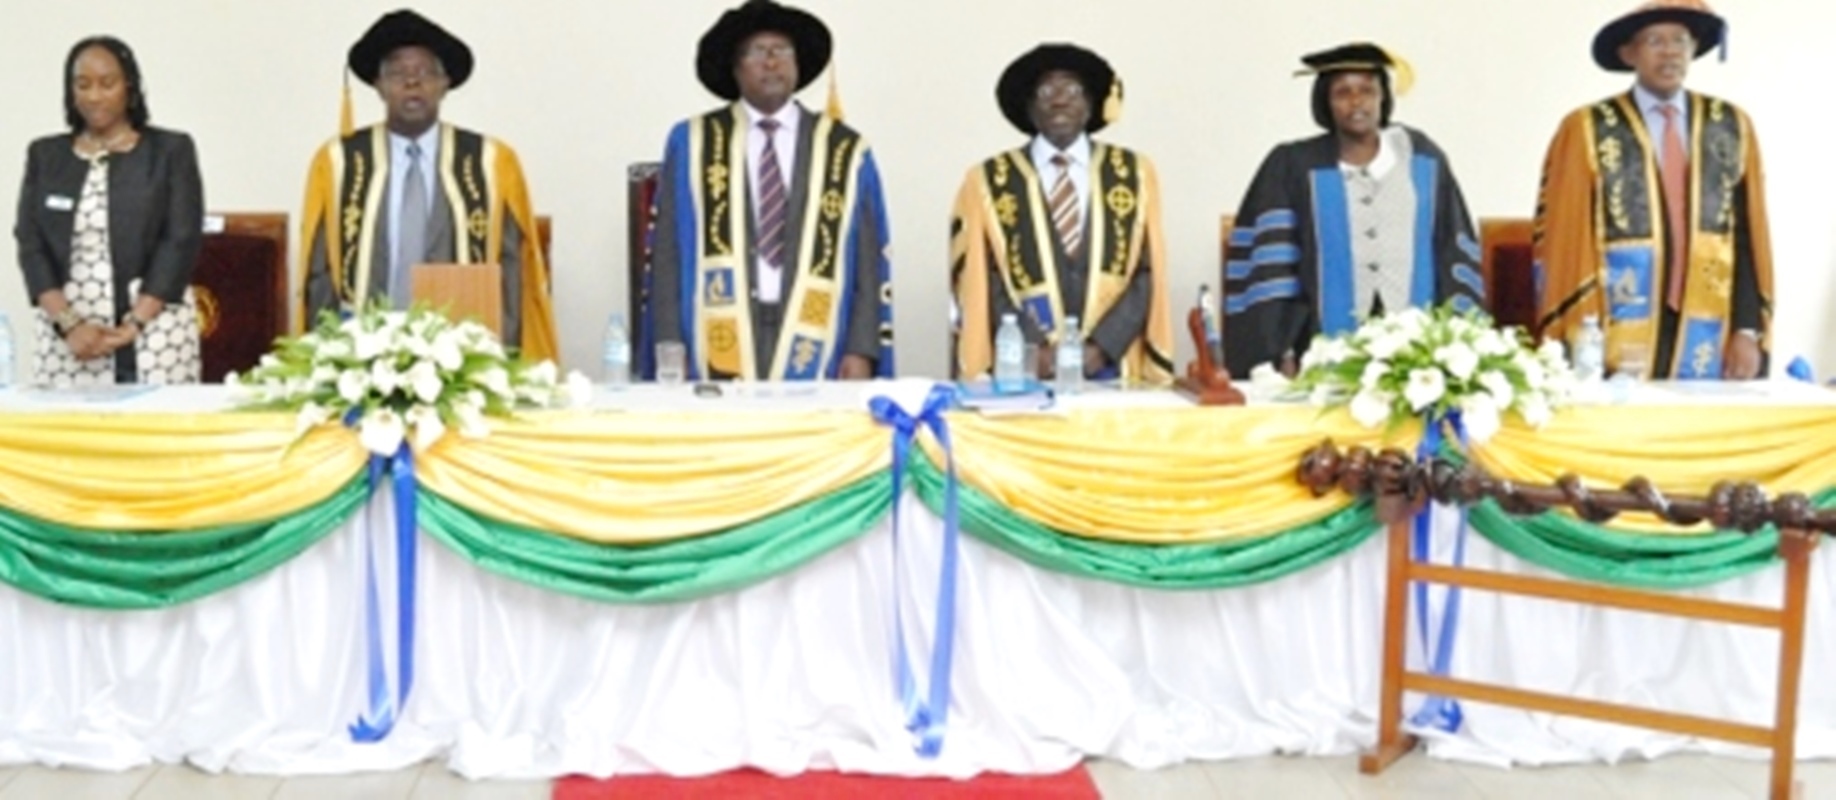 L-R MUST: DVC-Prof. Pamela Mbabazi, Out-going VC-Prof. Prof. F.I.B Kayanja, Chancellor-Prof. Peter N. Mugyenyi, In-coming VC-Prof. Celestino Obua, Minister of Education and Sports-Hon. Maj (Rtd). Jessica Alupo and Chairperson of Council-Dr. Ben Mbonye at the VC Inauguration on 24th October 2014. Image courtesy MUST